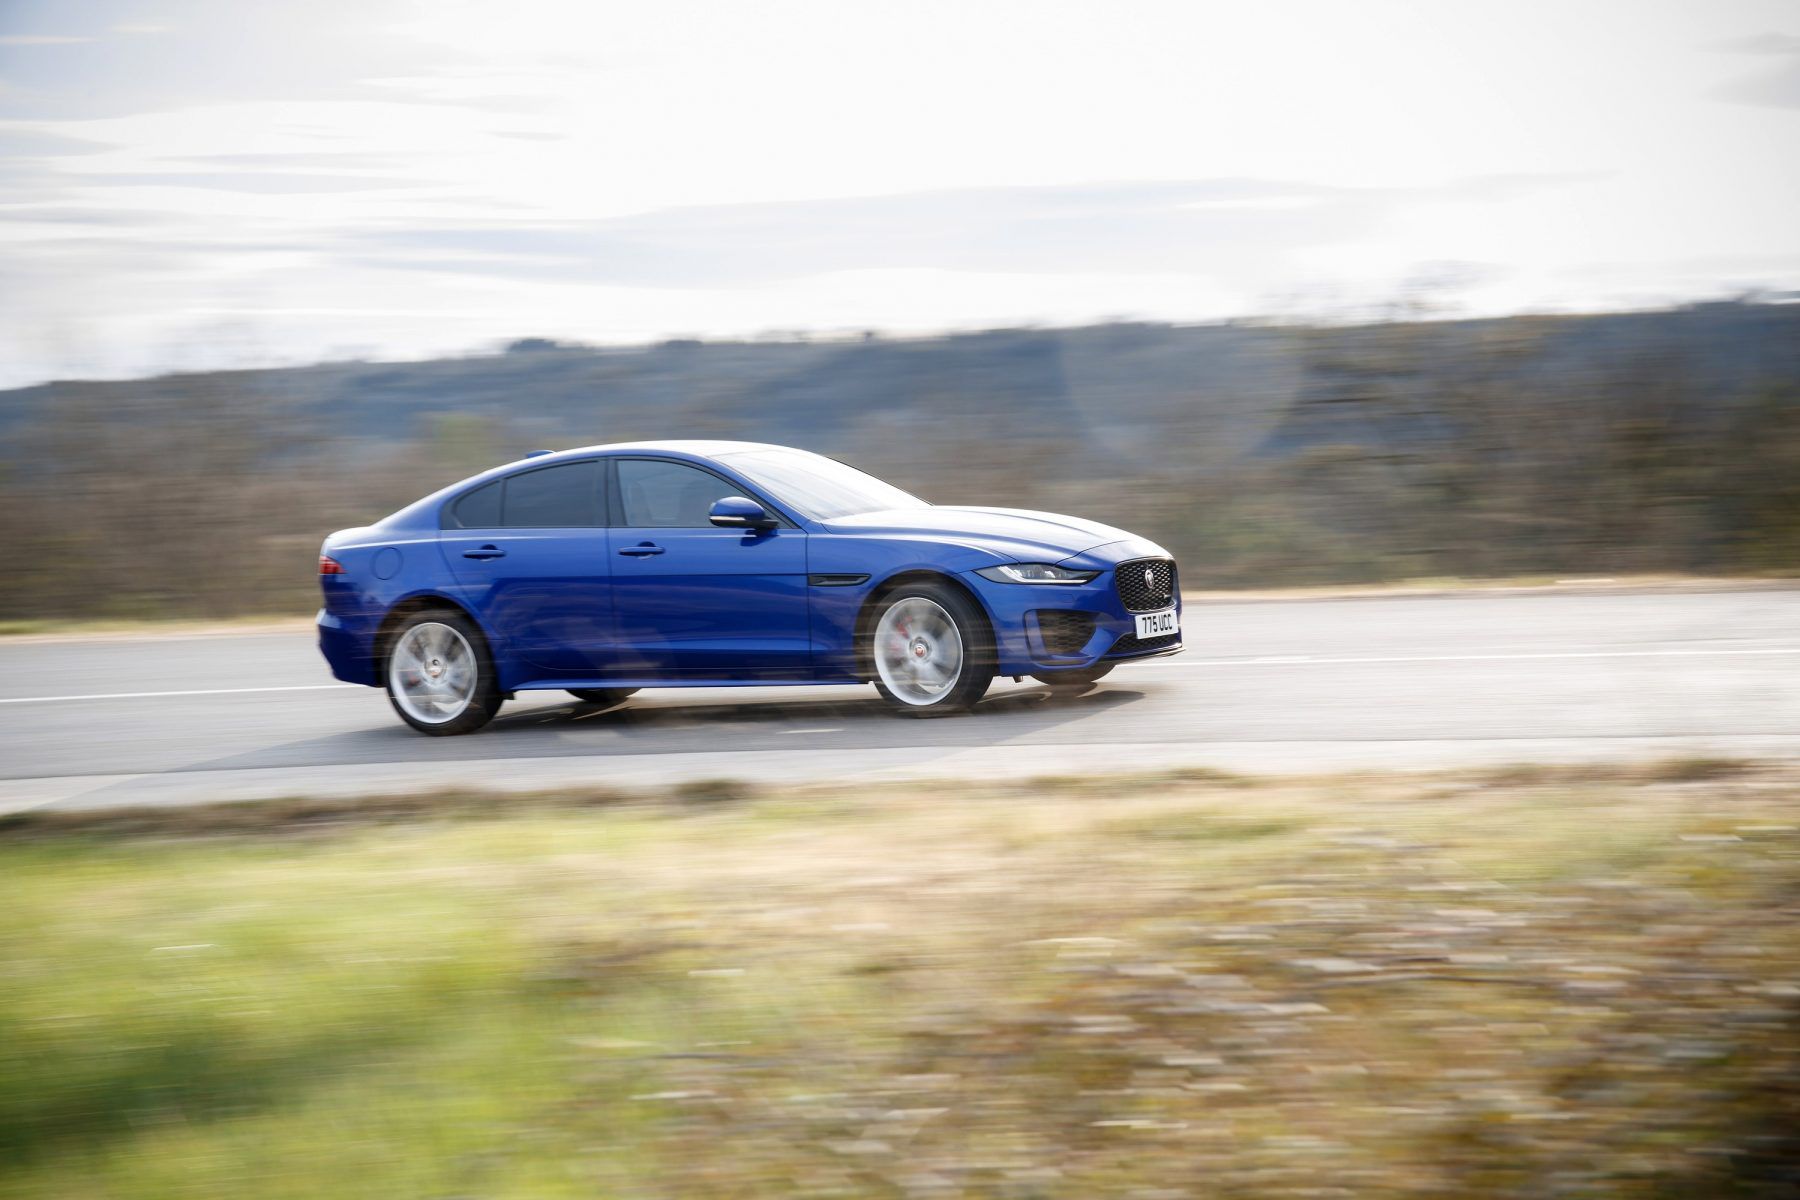 Side View of the blue Jaguar XE driving on a road